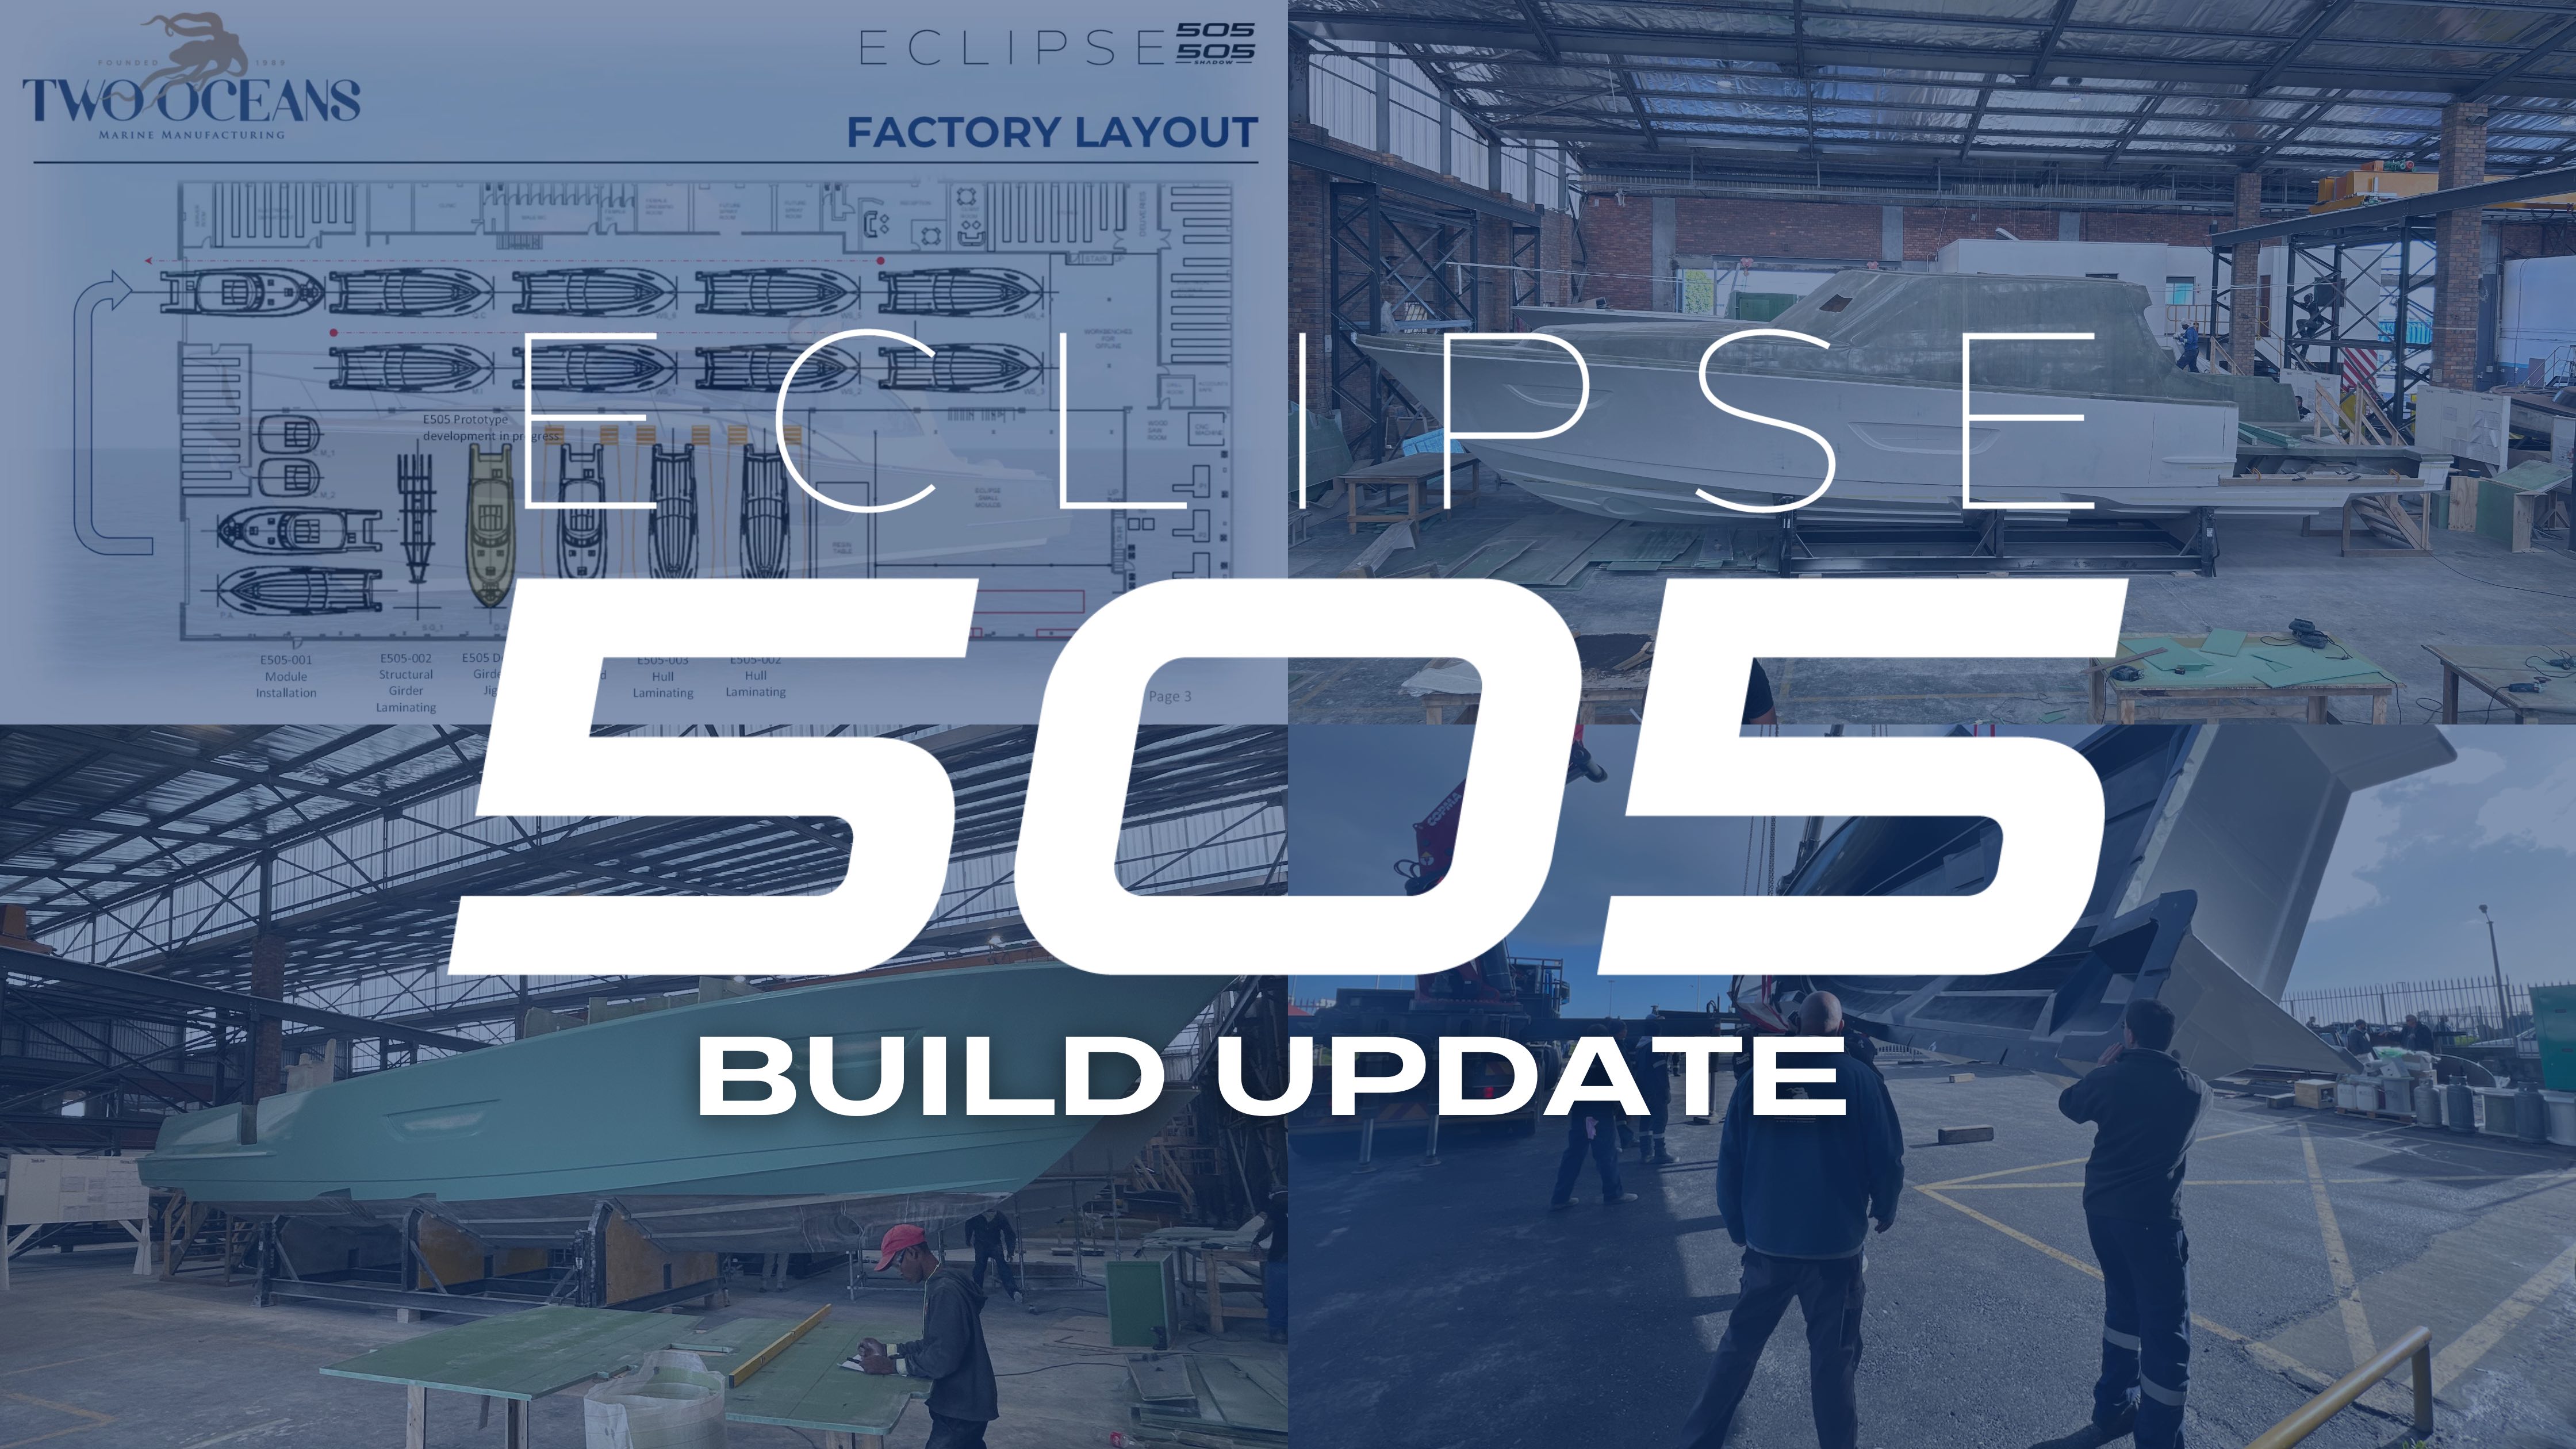 ECLIPSE 505 Express Cruiser Build Update: Paint & the Factory Layout Released